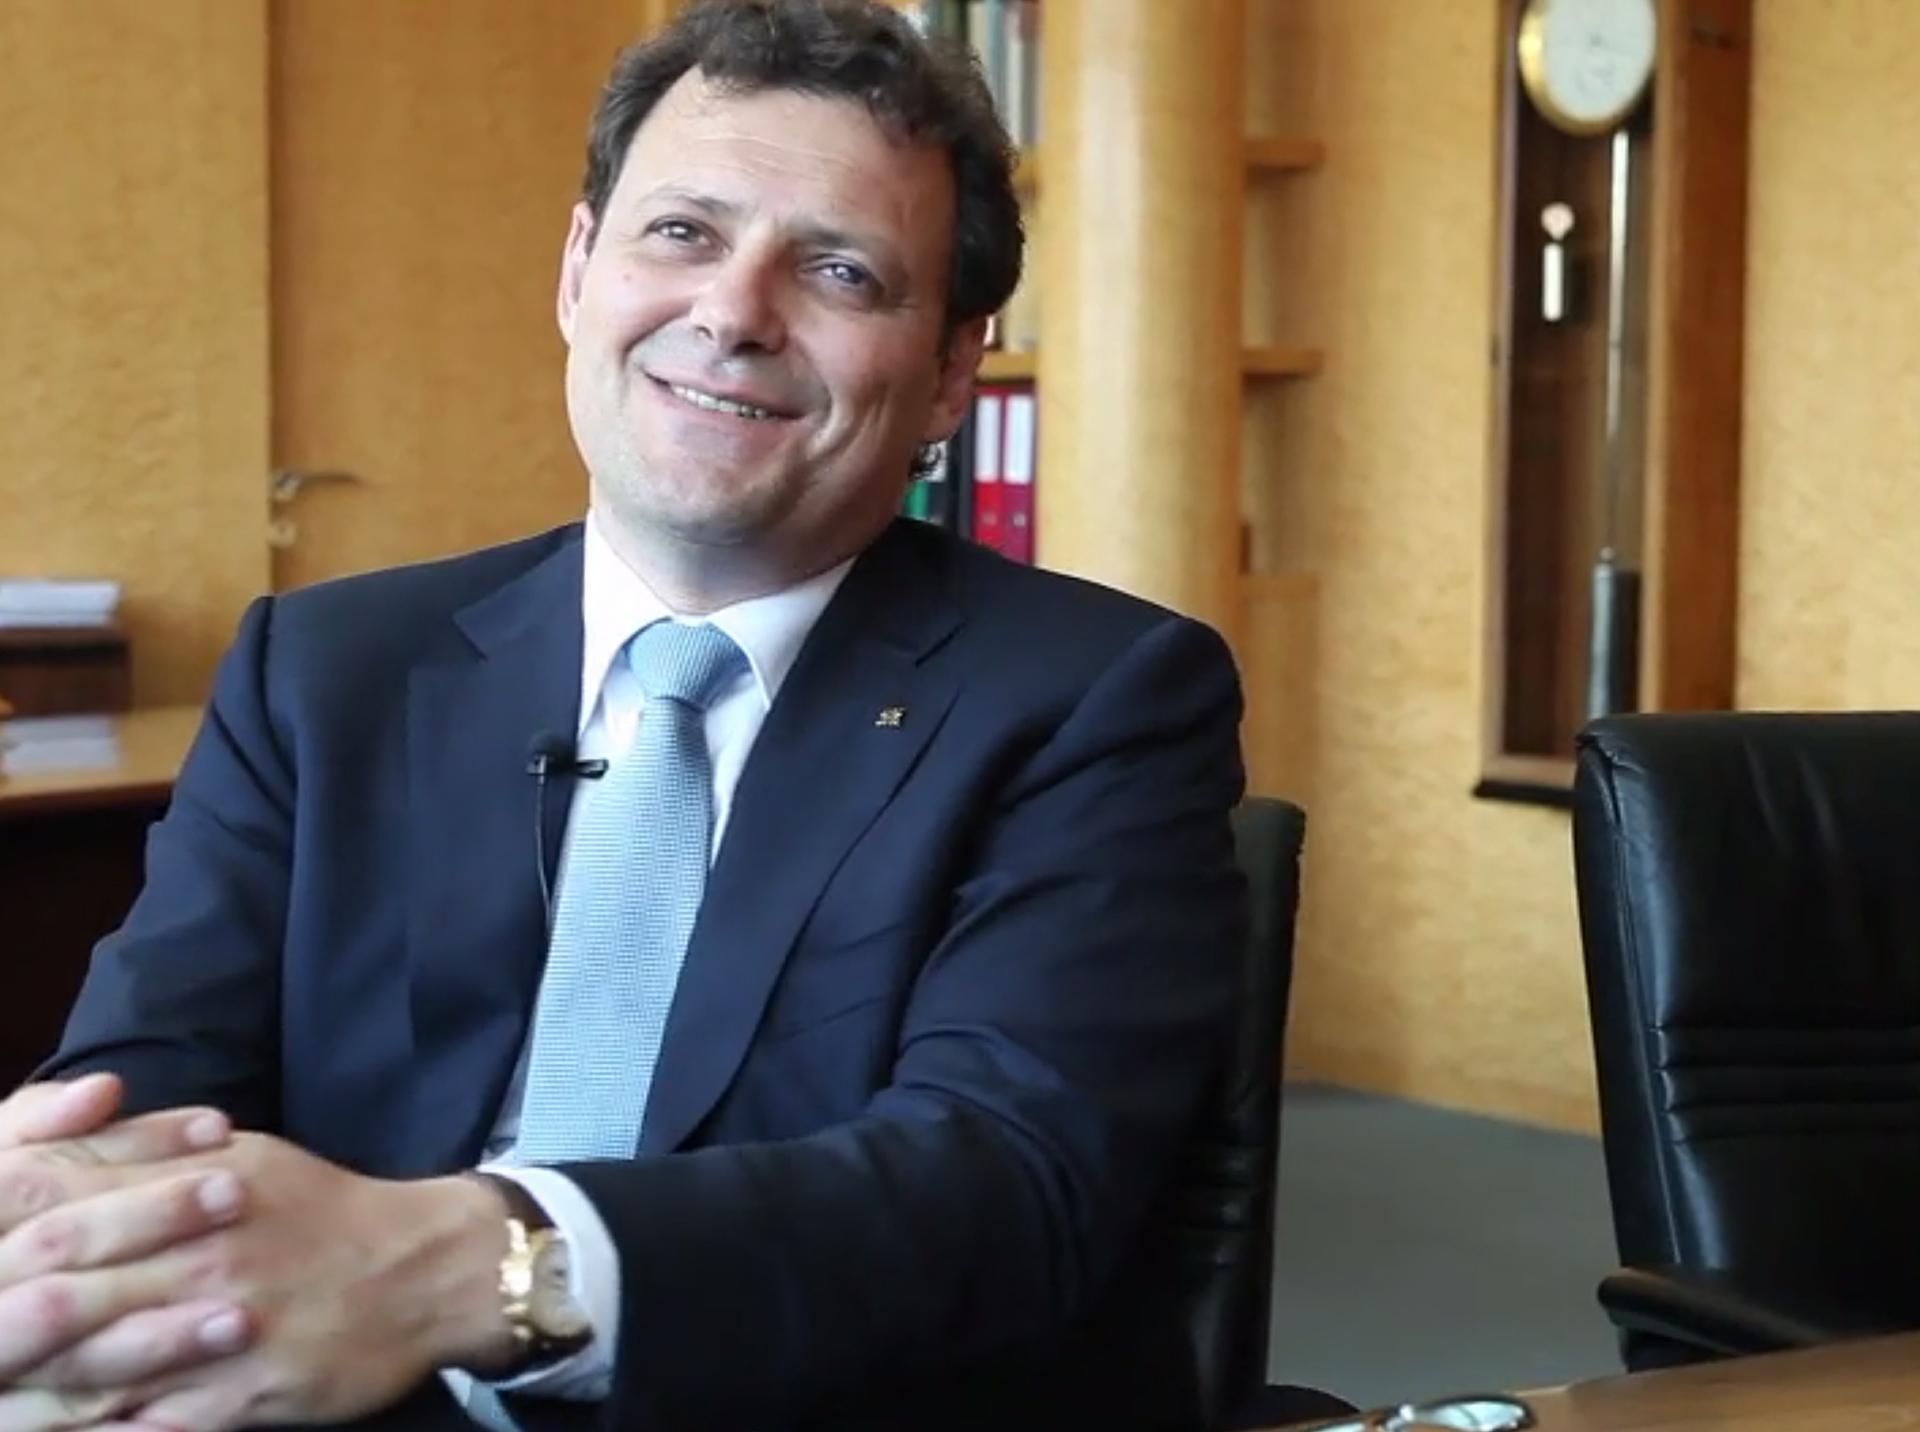 CEO Thierry Stern On Why Patek Philippe Will Stay Family-Owned